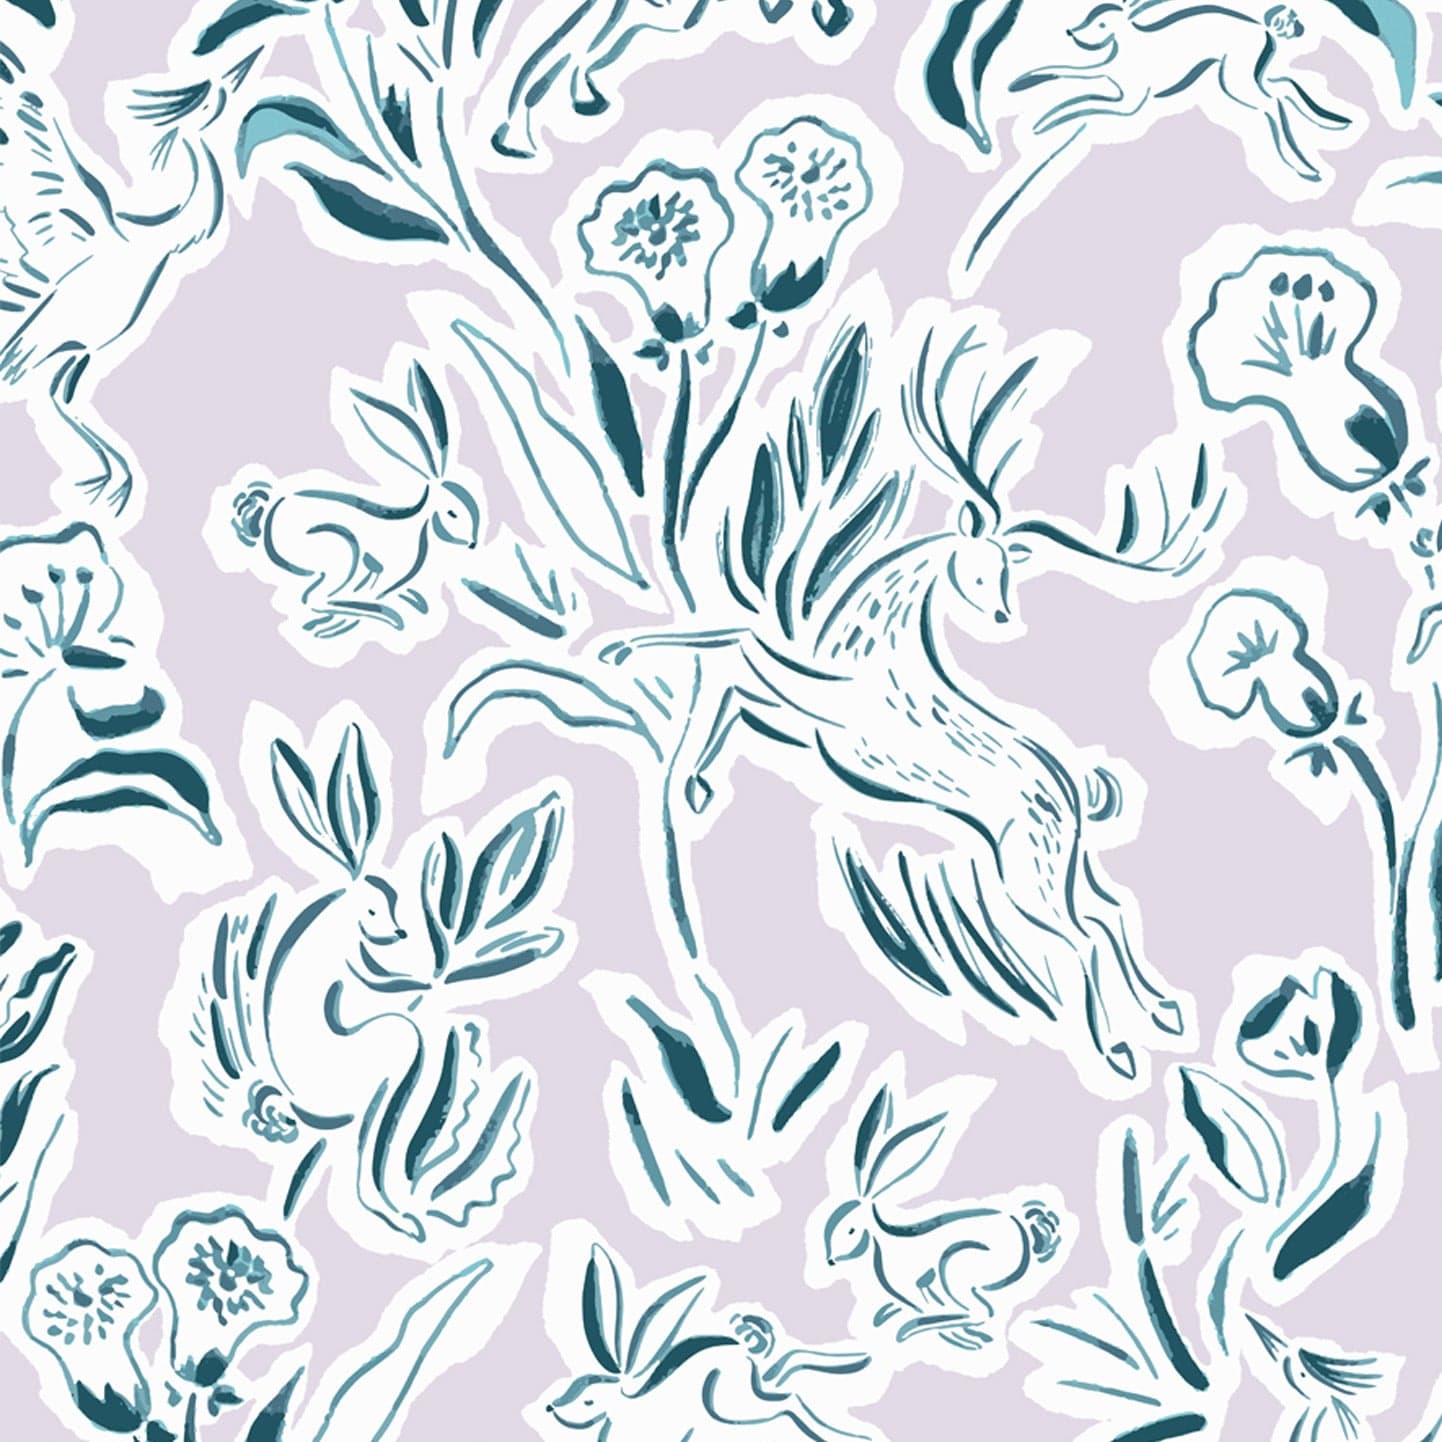 Wallpaper sample of teal deers, rabbits and flowers with a pastel purple background. 